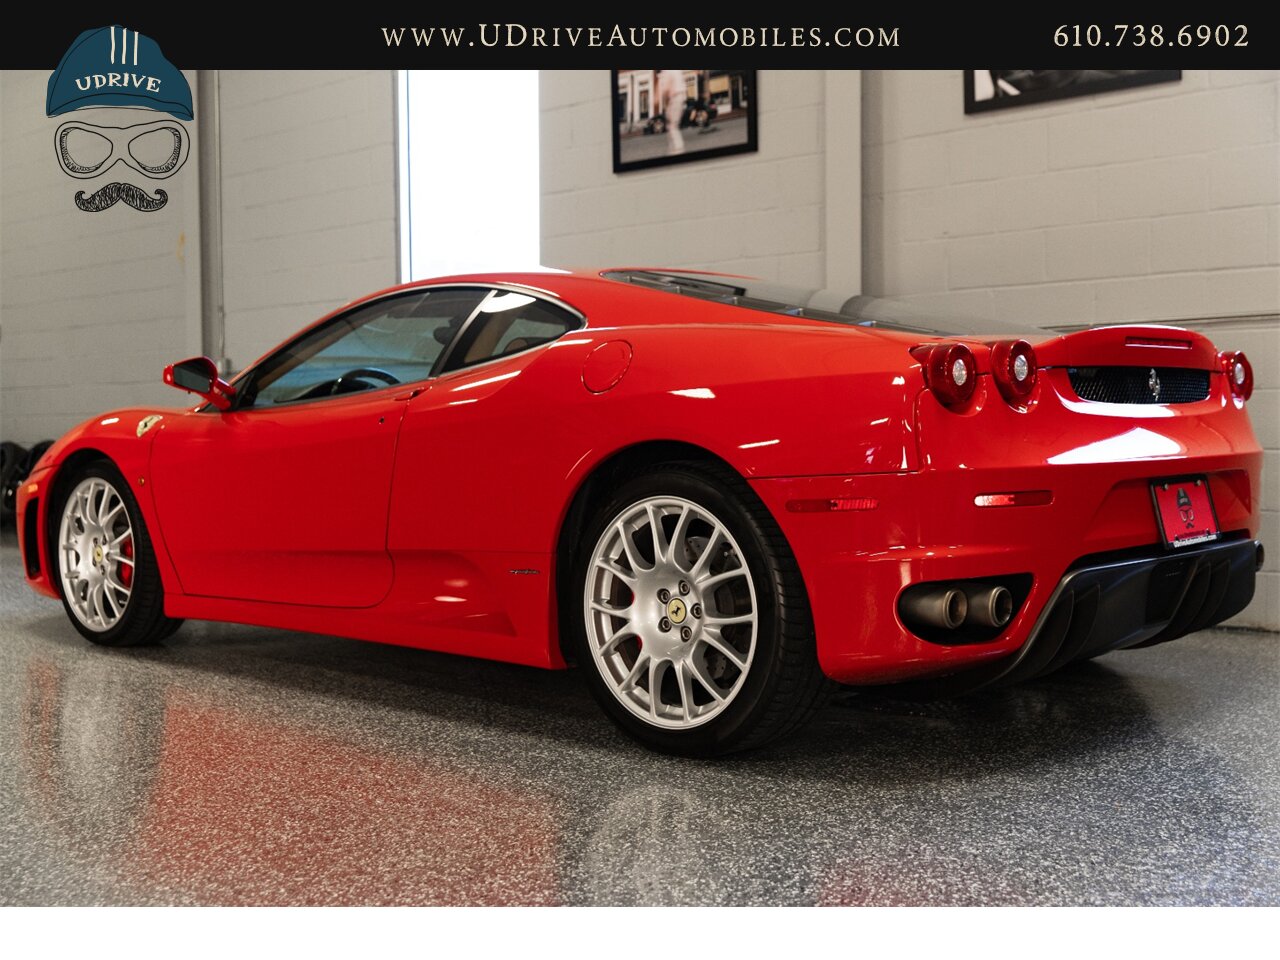 2006 Ferrari F430 F1 Coupe 1 Owner Daytona Seats Challenge Whls  Carbon Fibre Upper Lower Zone Shields Piping Serv Hist $208k MSRP - Photo 20 - West Chester, PA 19382